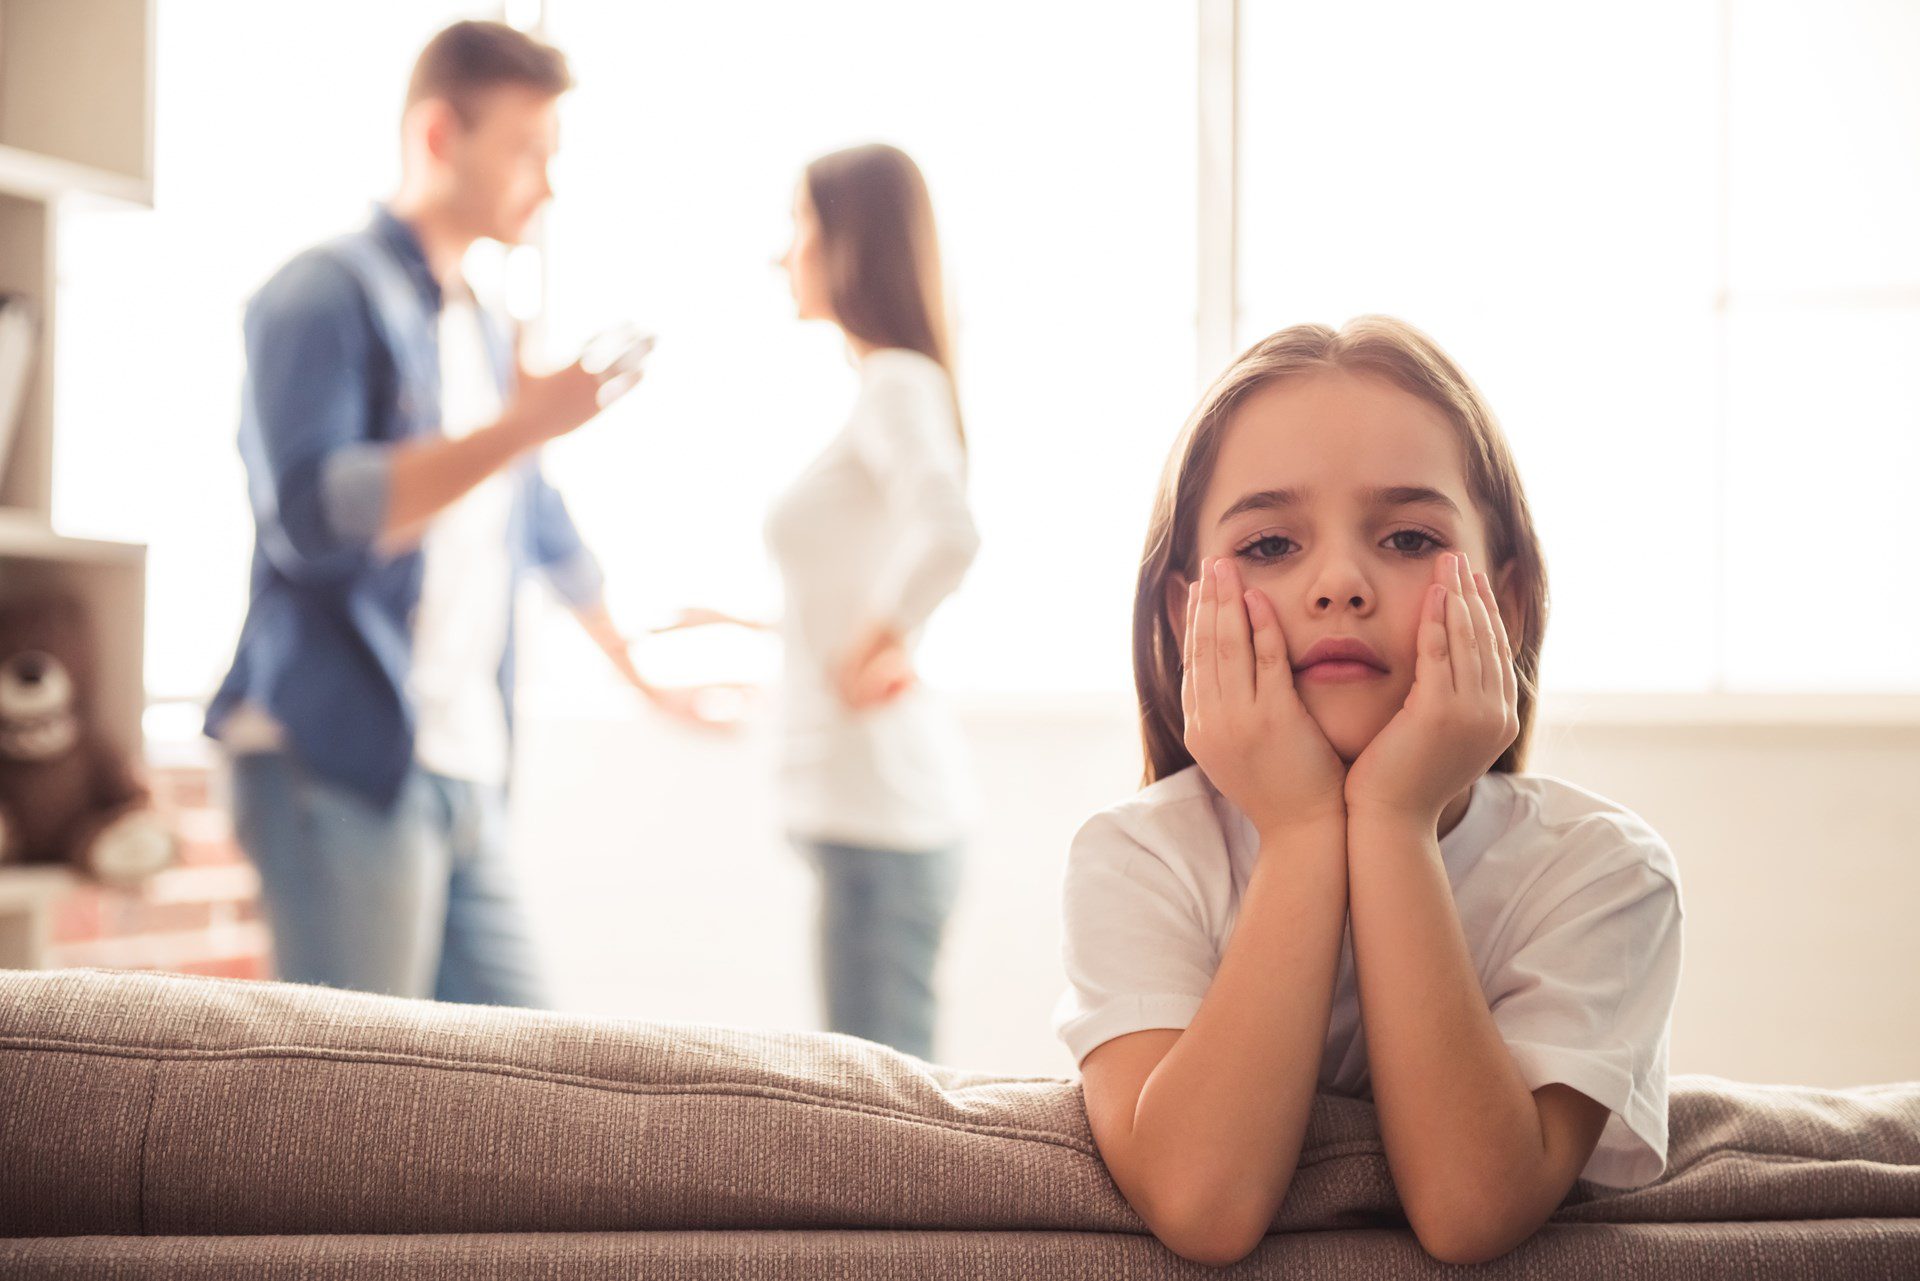 How Best To Deal With Child Custody During The Coronavirus Crisis